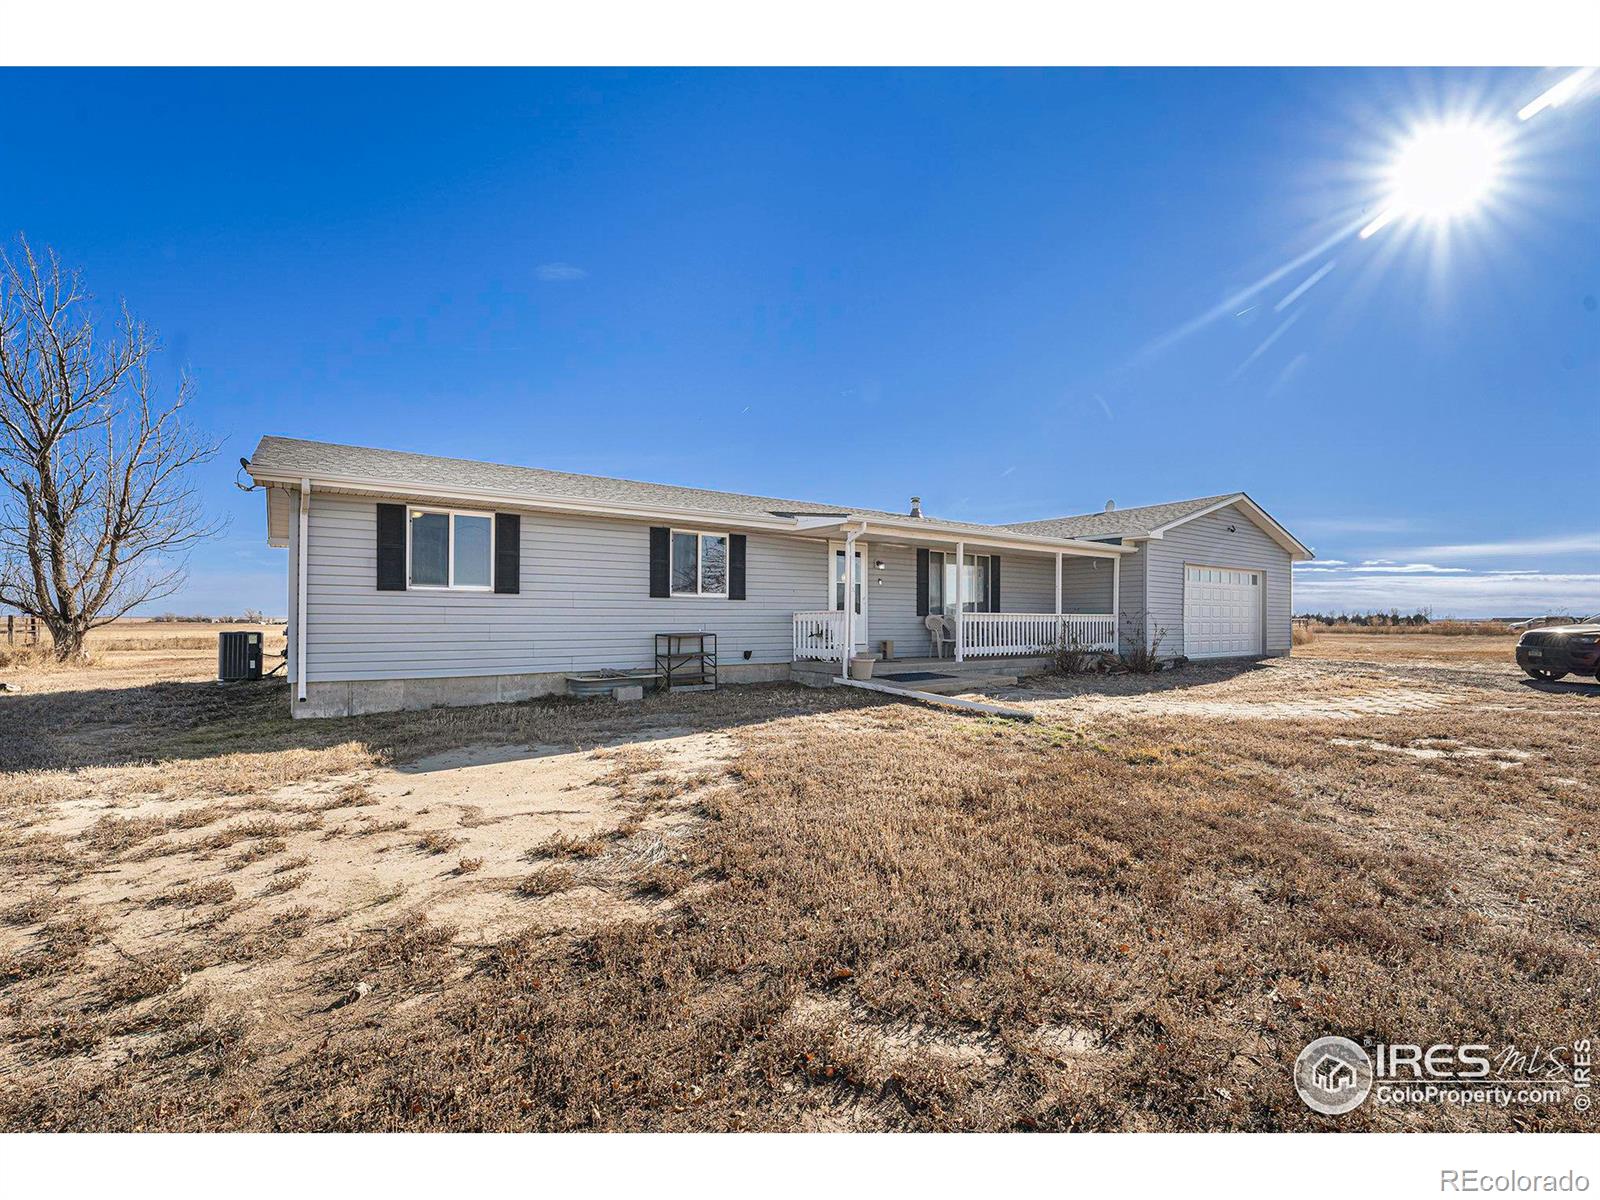 Report Image for 34031  County Road 8 ,Keenesburg, Colorado